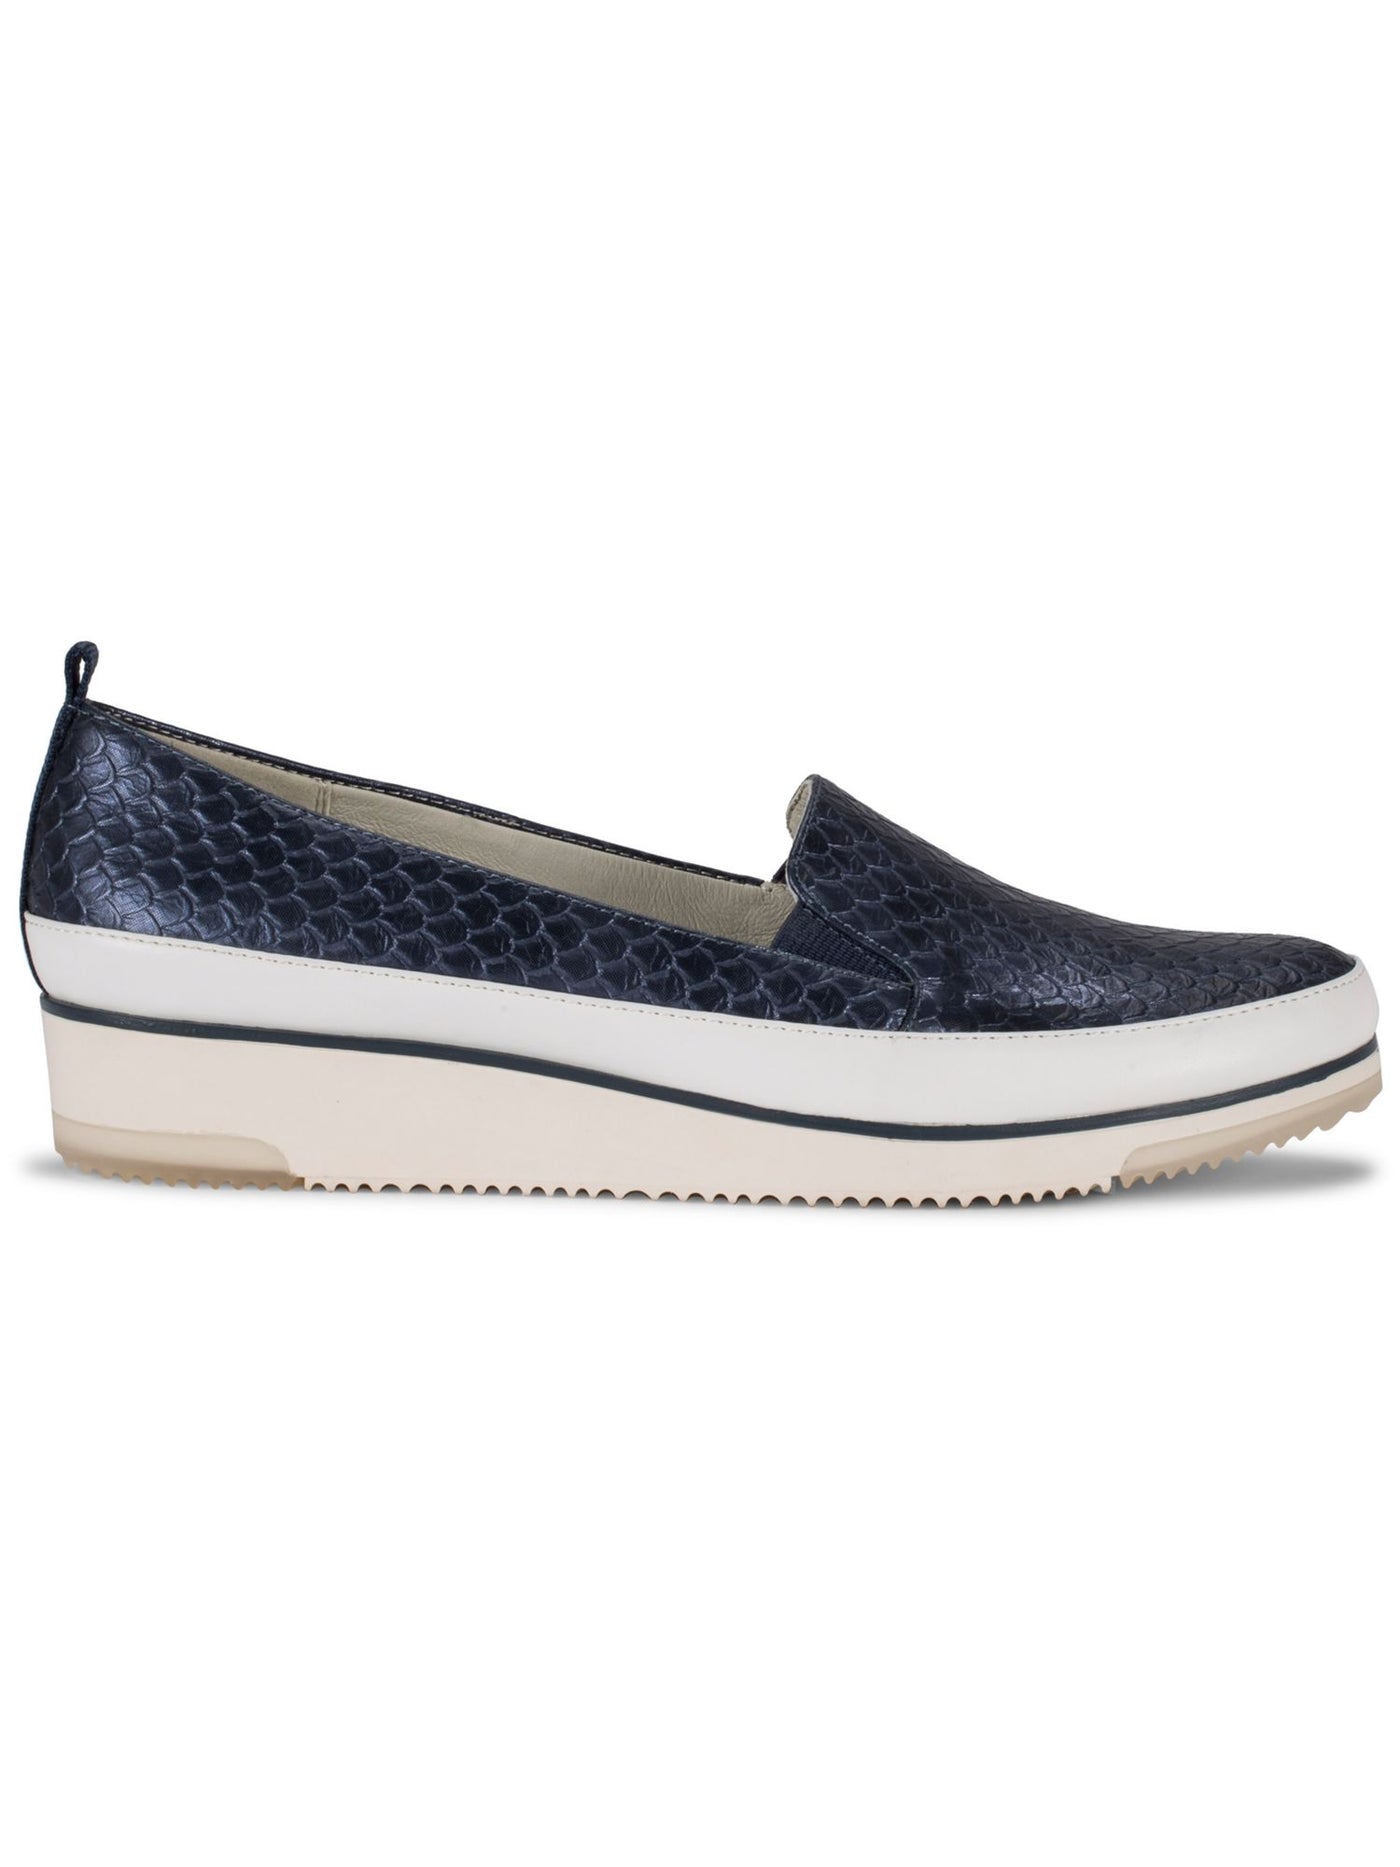 BARETRAPS Womens Navy Reptile Goring Padded Hope Almond Toe Wedge Slip On Sneakers Shoes 9 M